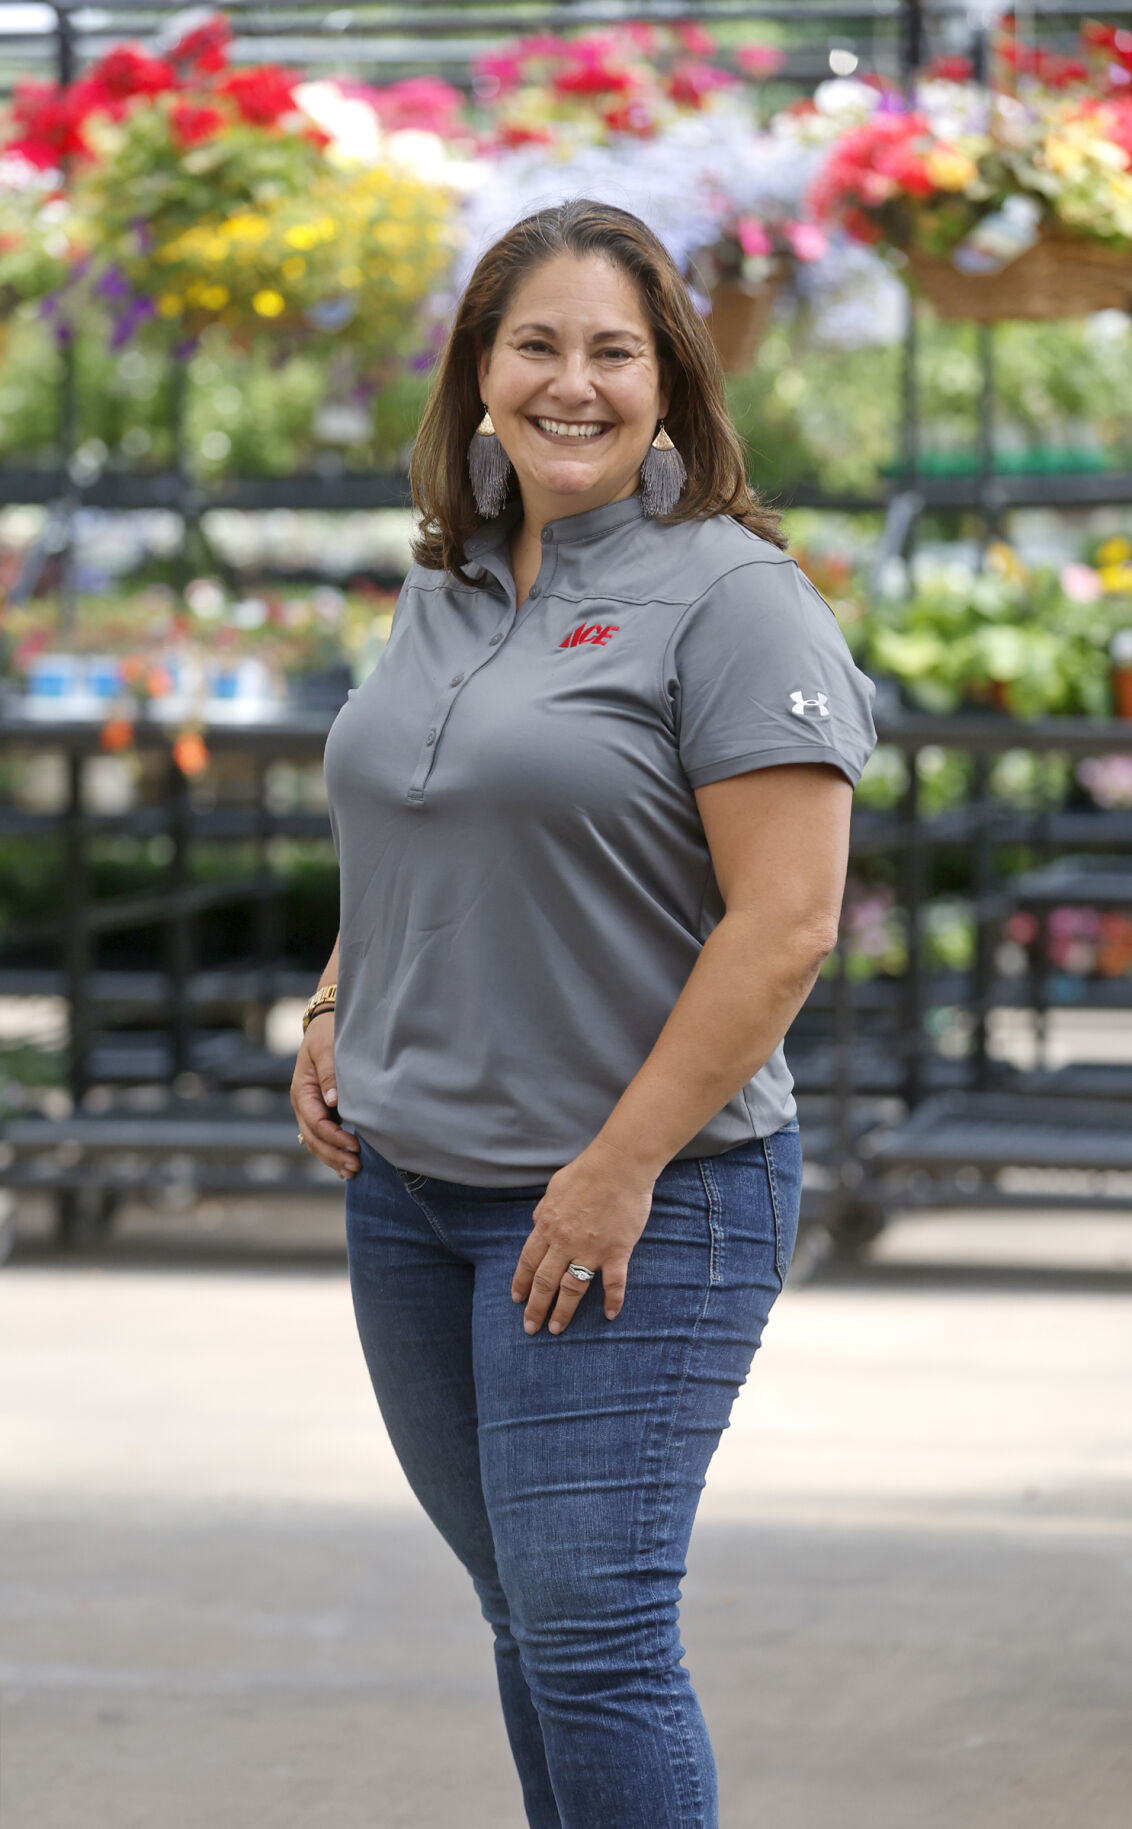 Stacy Raap is marketing and communications manager at Steve’s Ace Home & Garden in Dubuque.    PHOTO CREDIT: Jessica Reilly